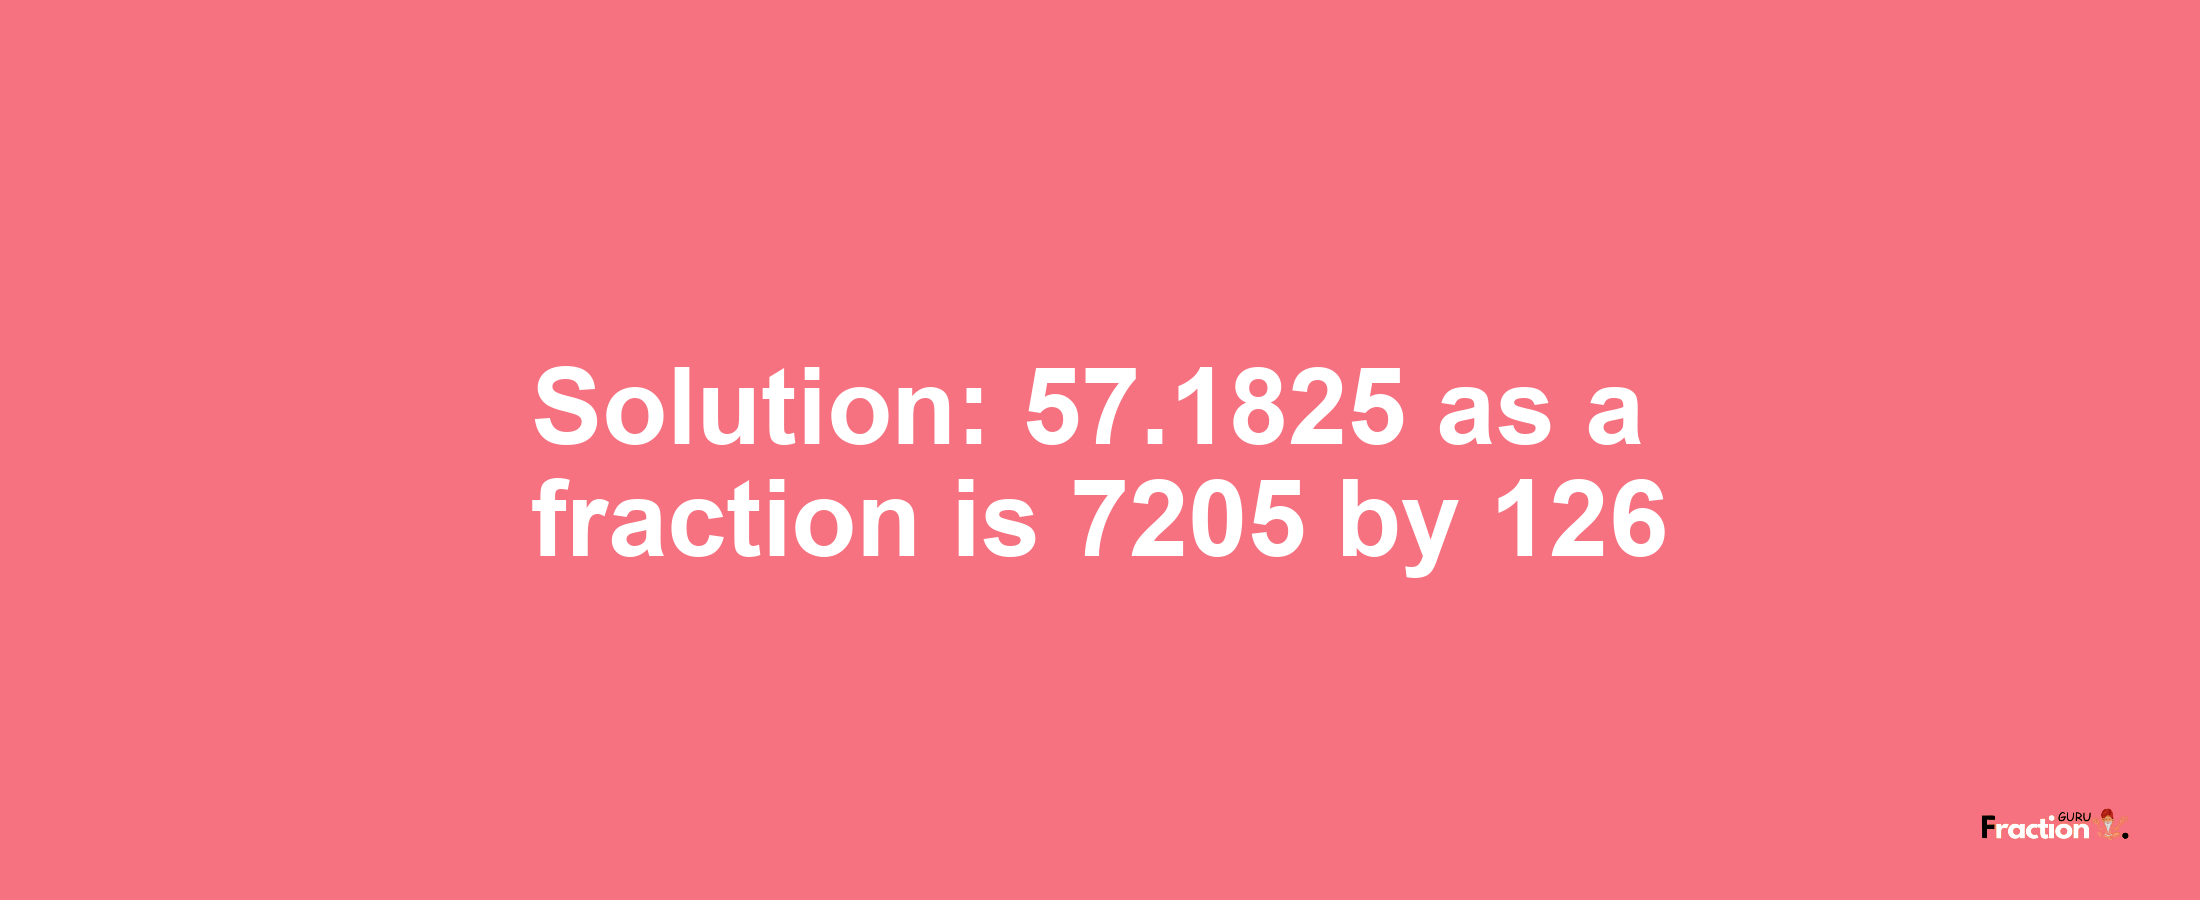 Solution:57.1825 as a fraction is 7205/126